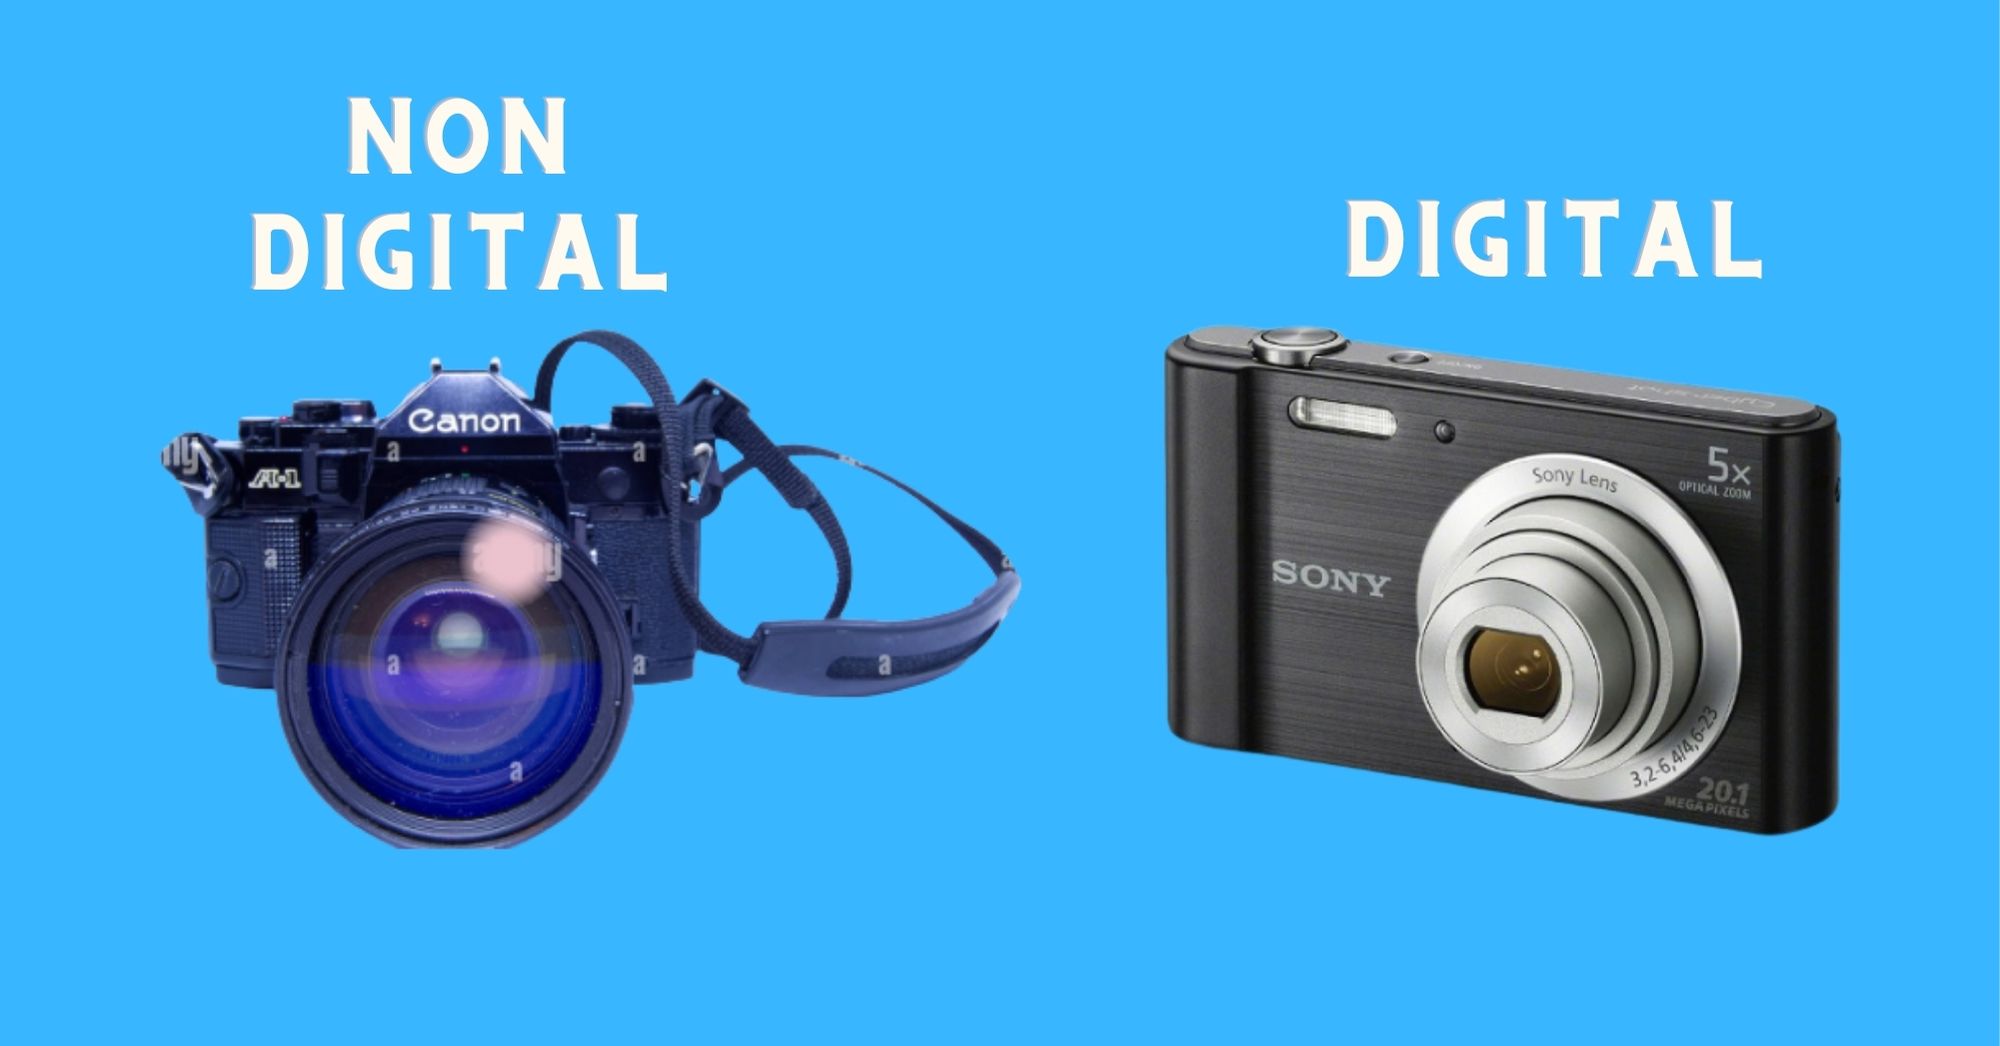 Which Best Compares A Nondigital And A Digital Camera